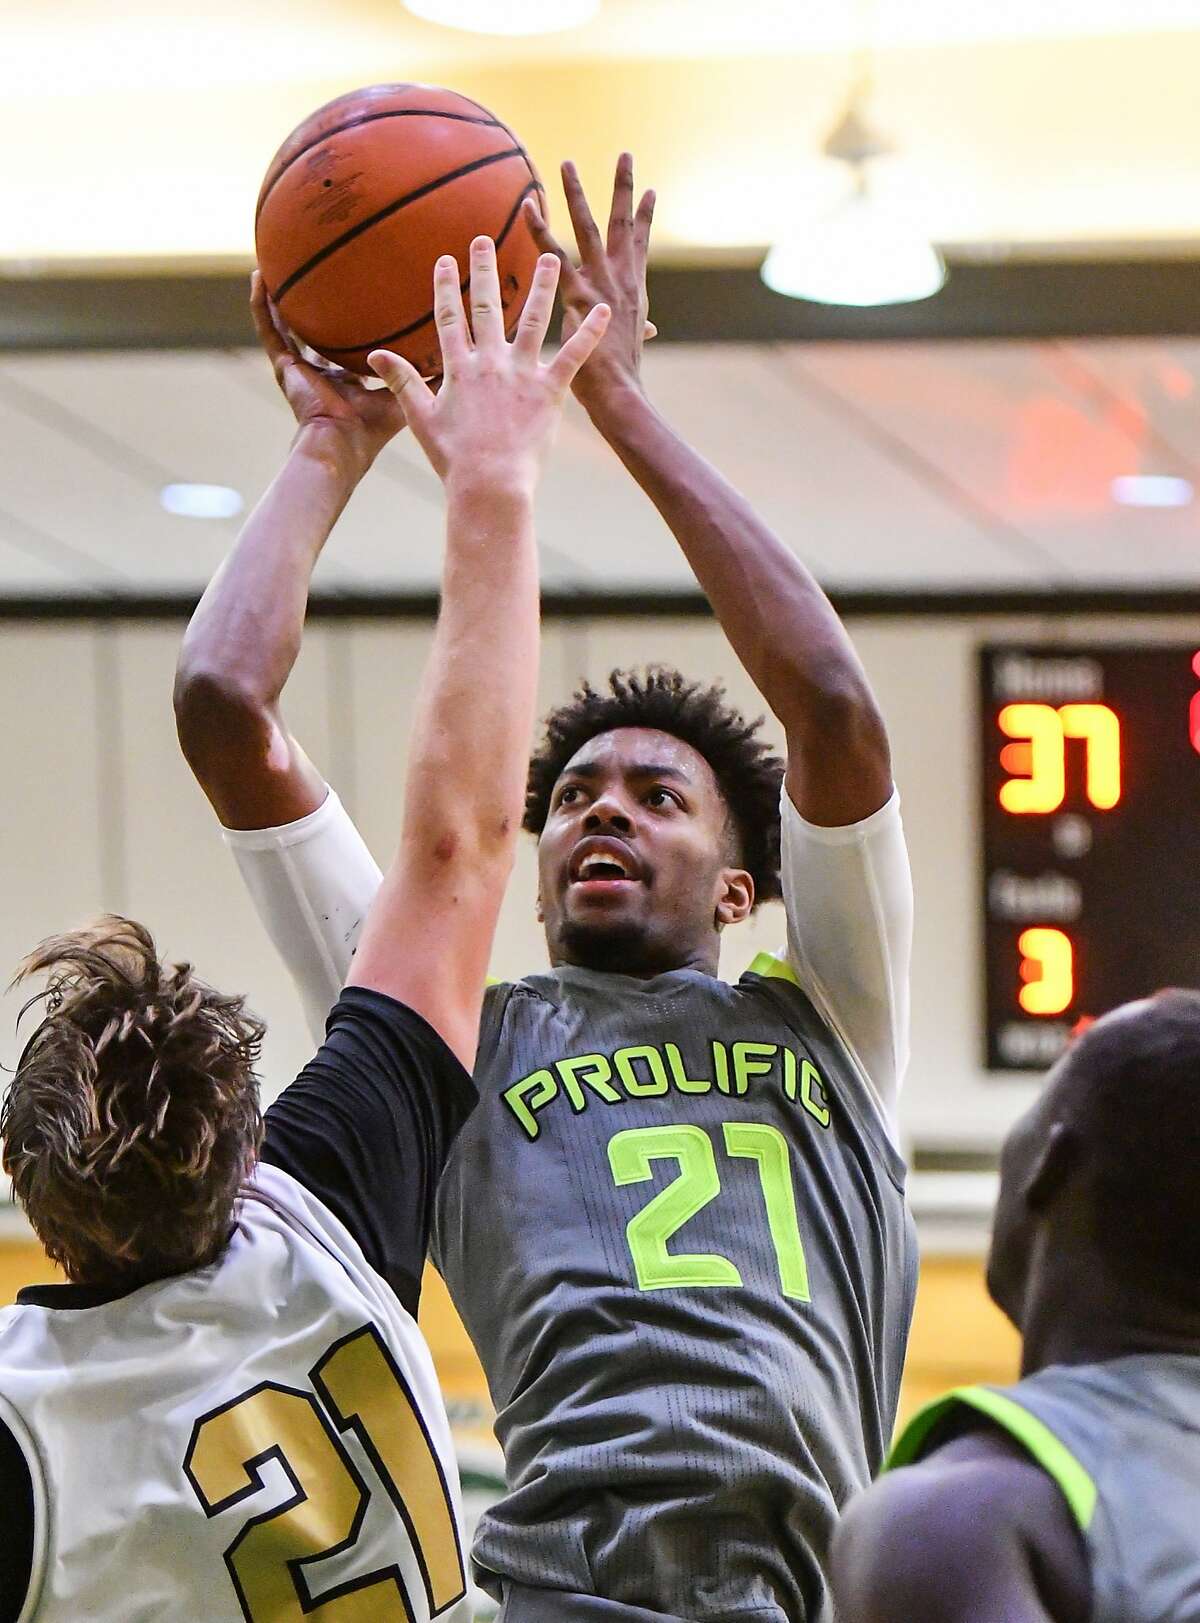 Jordan Brown, a 6-foot-10 190-pound senior at Prolific Prep-Napa, is among the nation's best high school players expected to participate in Saturday's Crush in the Valley in American Canyon.